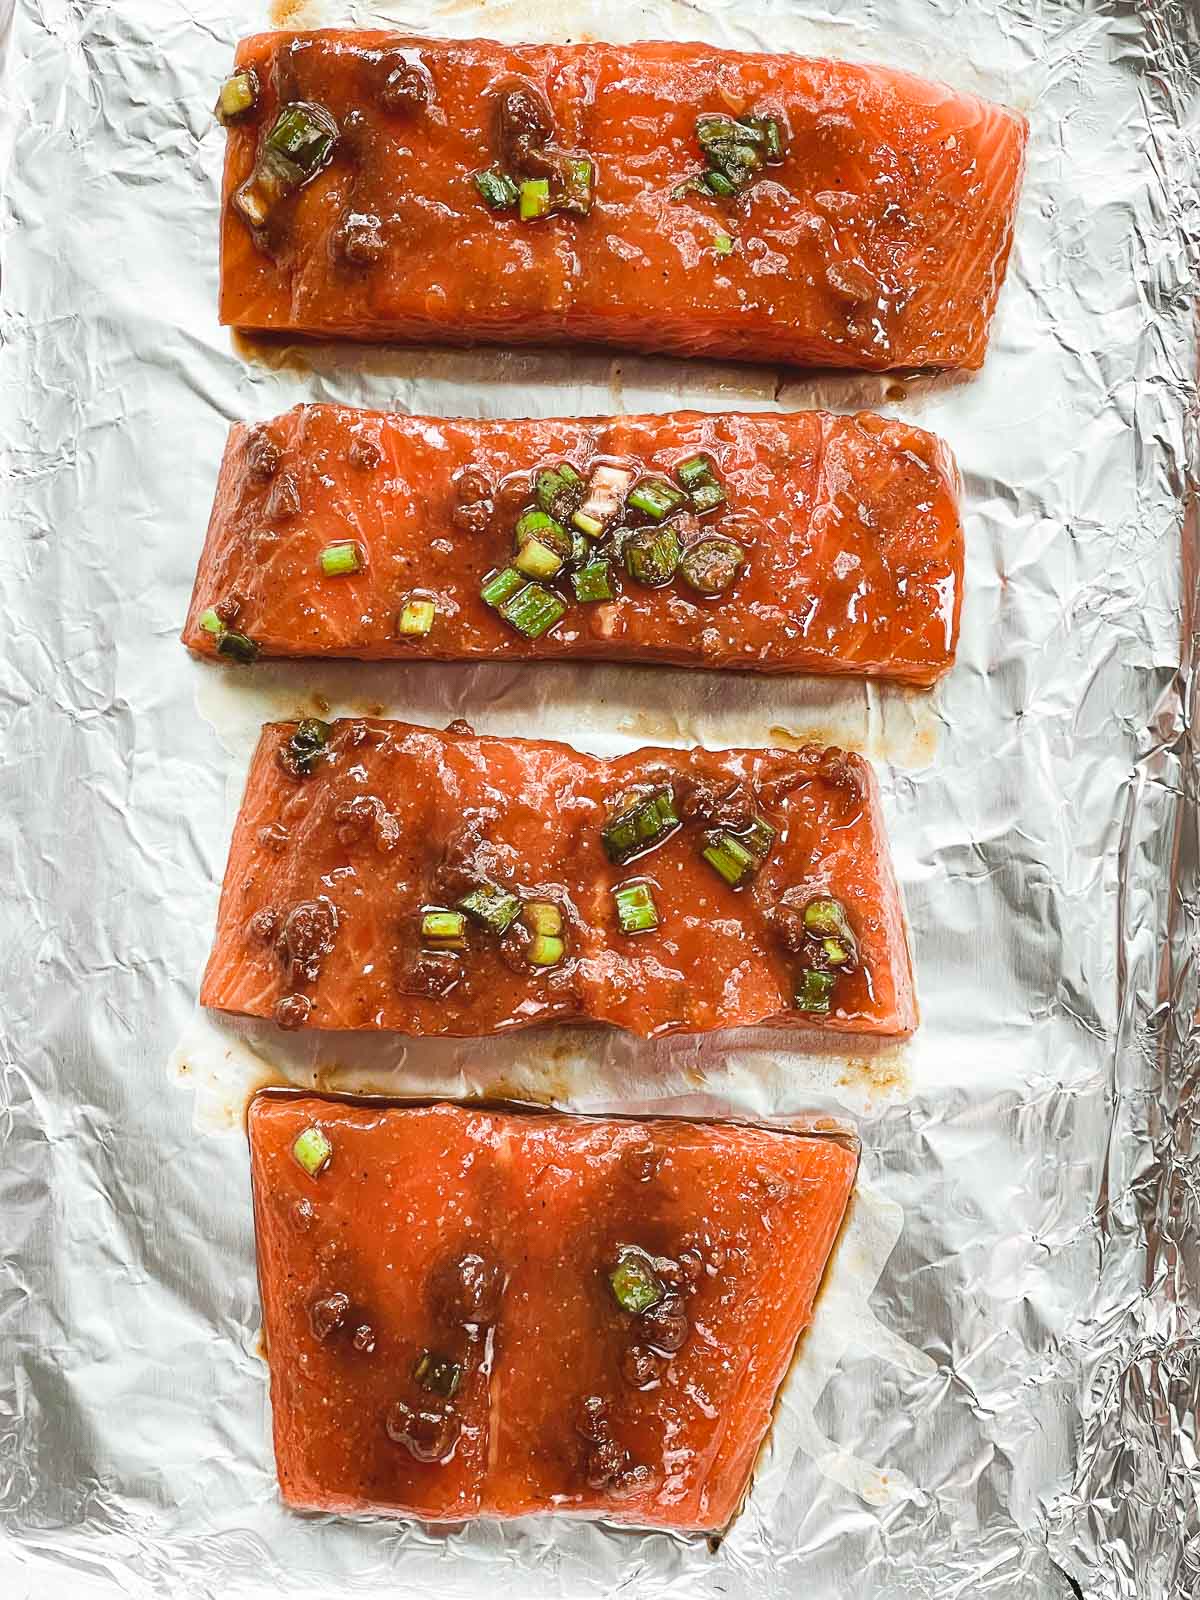 Four salmon filets topped with a miso marinade on a baking tray lined with tin foil ready for the oven.